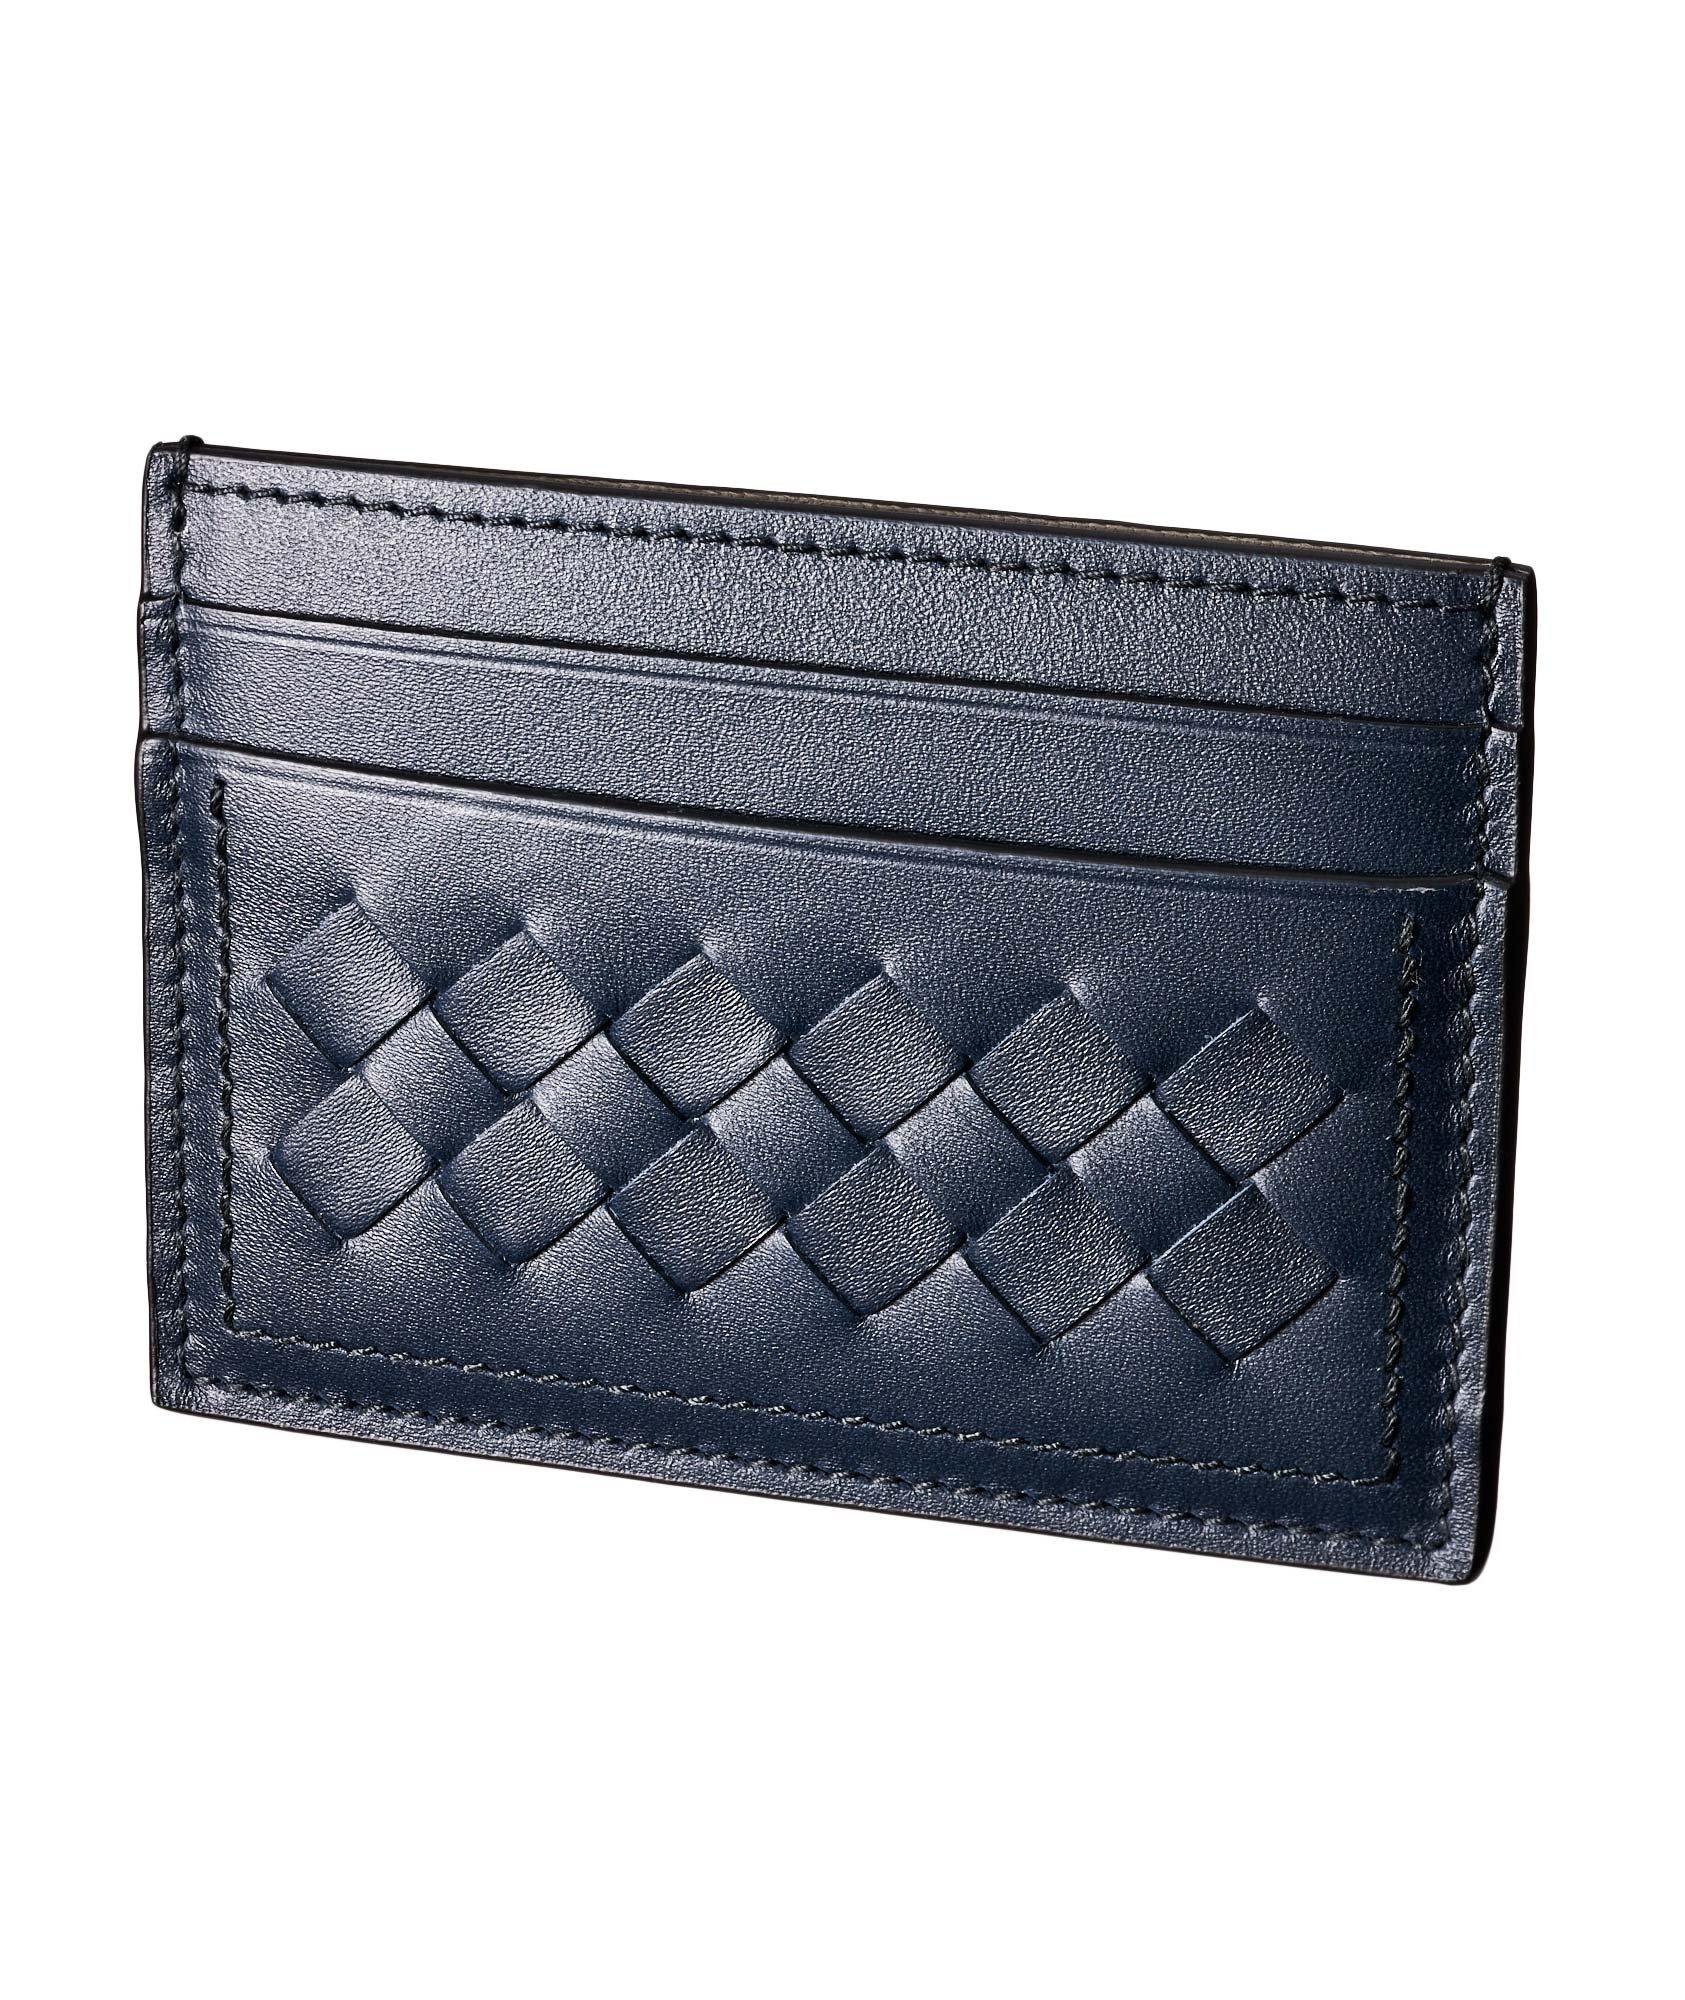 Woven Leather Cardholder image 0